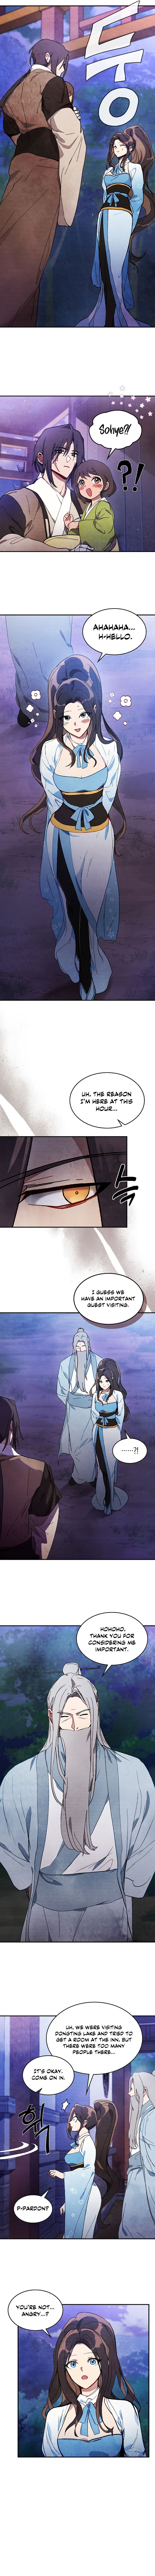 chronicles-of-the-martial-gods-return-chap-42-5